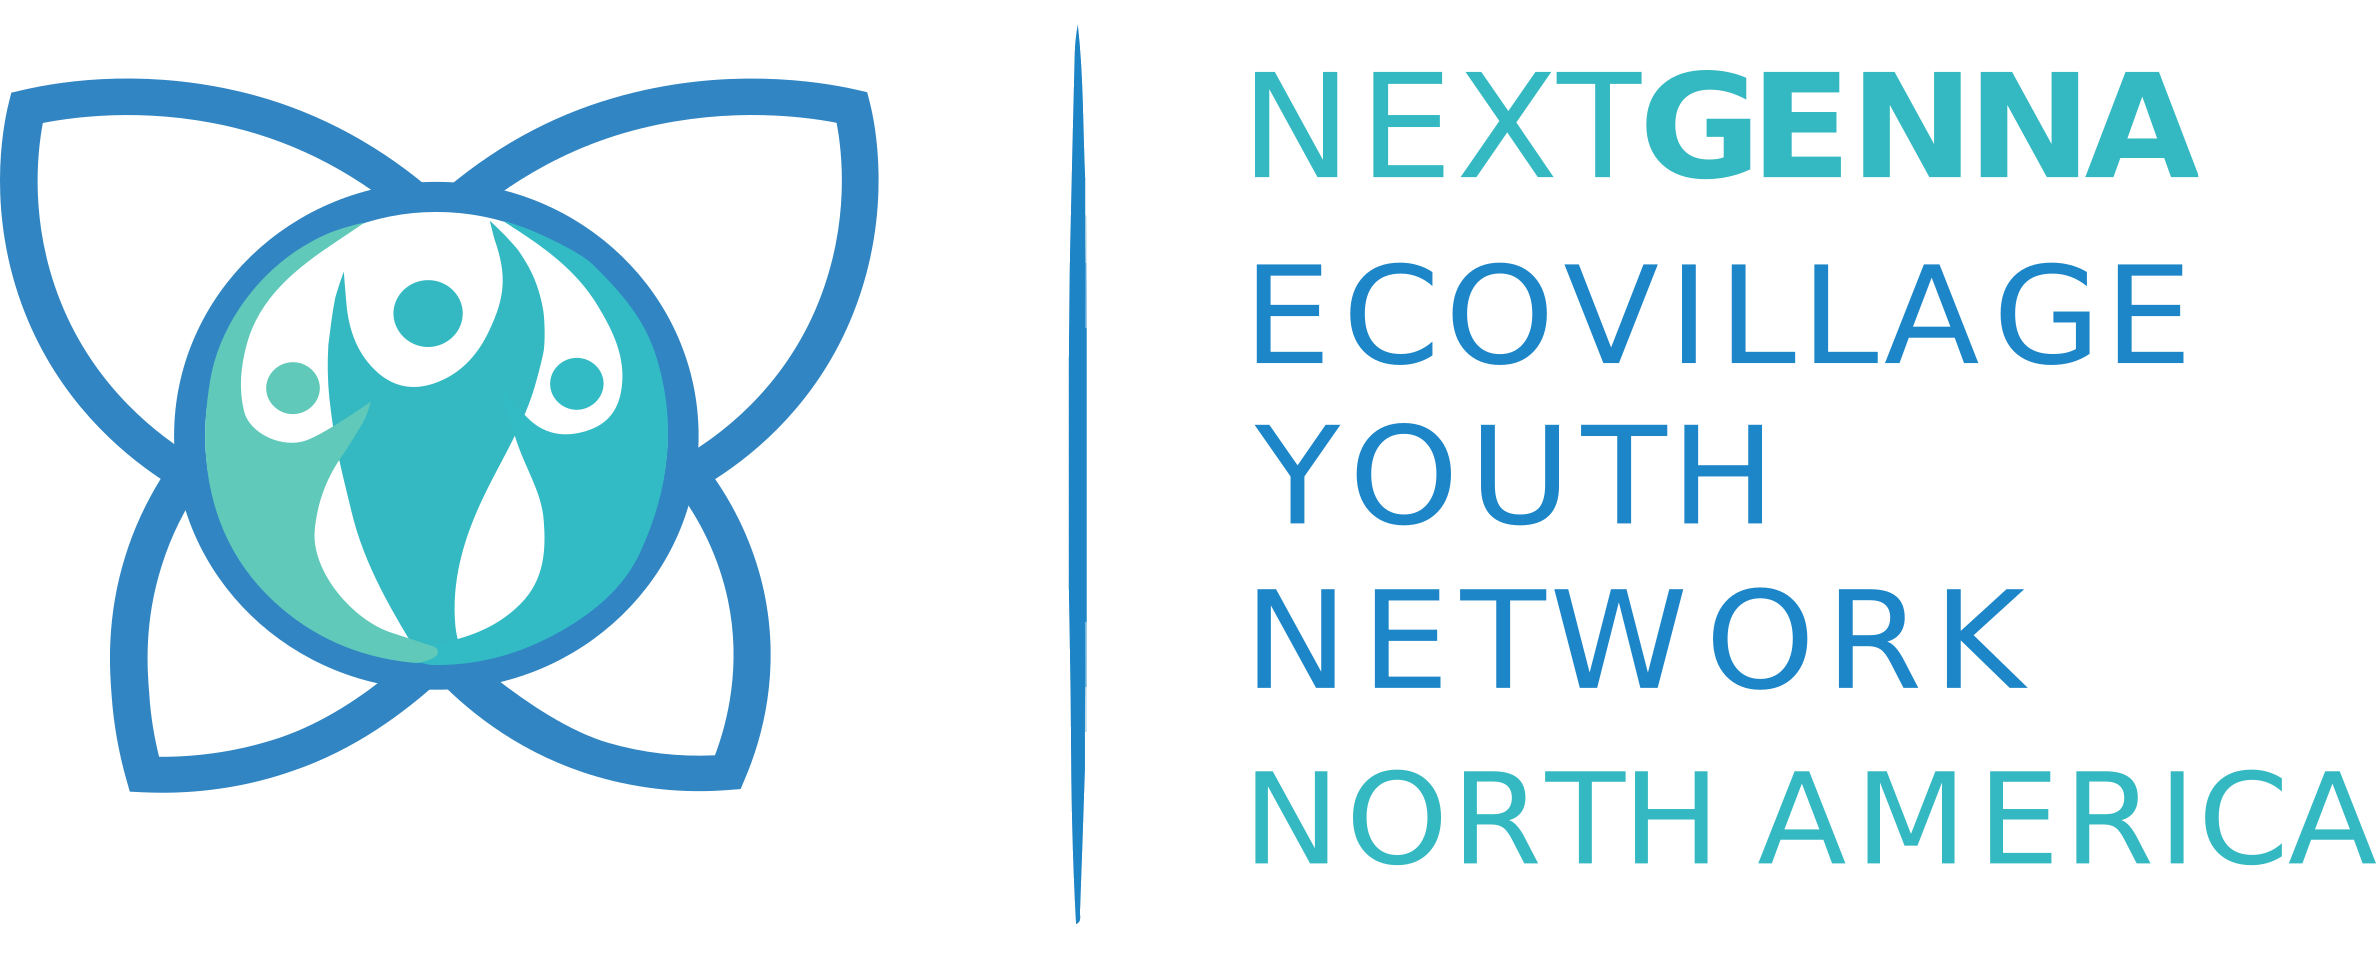 Next GENNA - youth initiative born out of the Global Ecovillage Network (GEN).  - Partner of Sociocracy for All